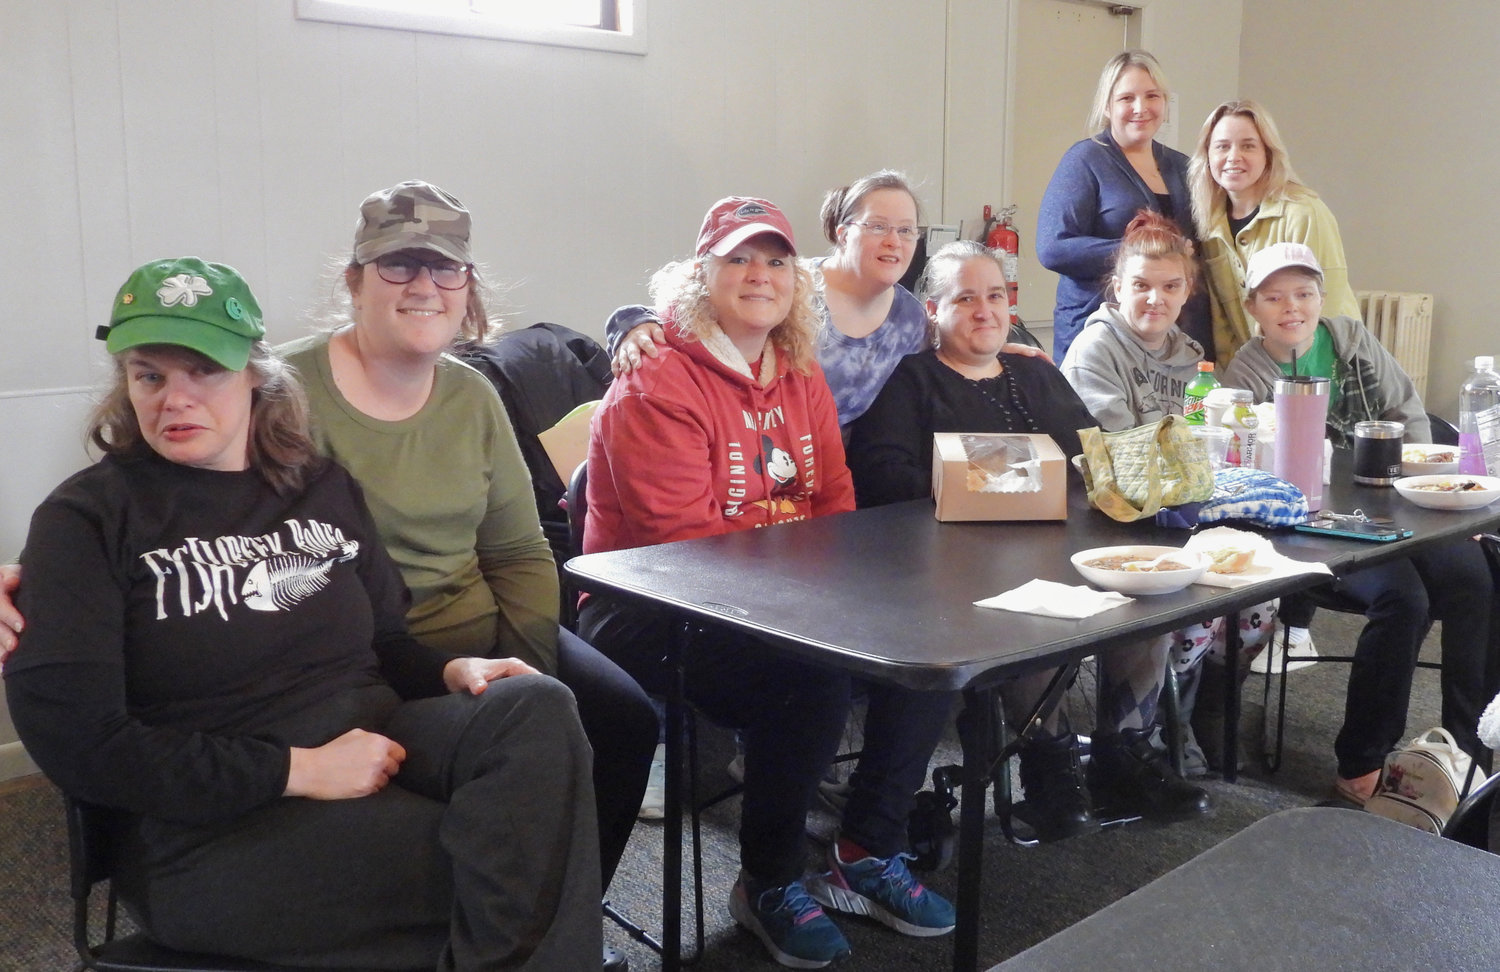 Volunteers at Church on the Rock pause for a brief moment for lunch and a photo. Pictured: Erin Conley, left, Katelyn Gardner, Faith Musachio, Aeryn Mitchell (Standing), Vicky Vanlale, Billie Jo Young, Brittany Agan, Carrie and Desirra Stedman (Standing)